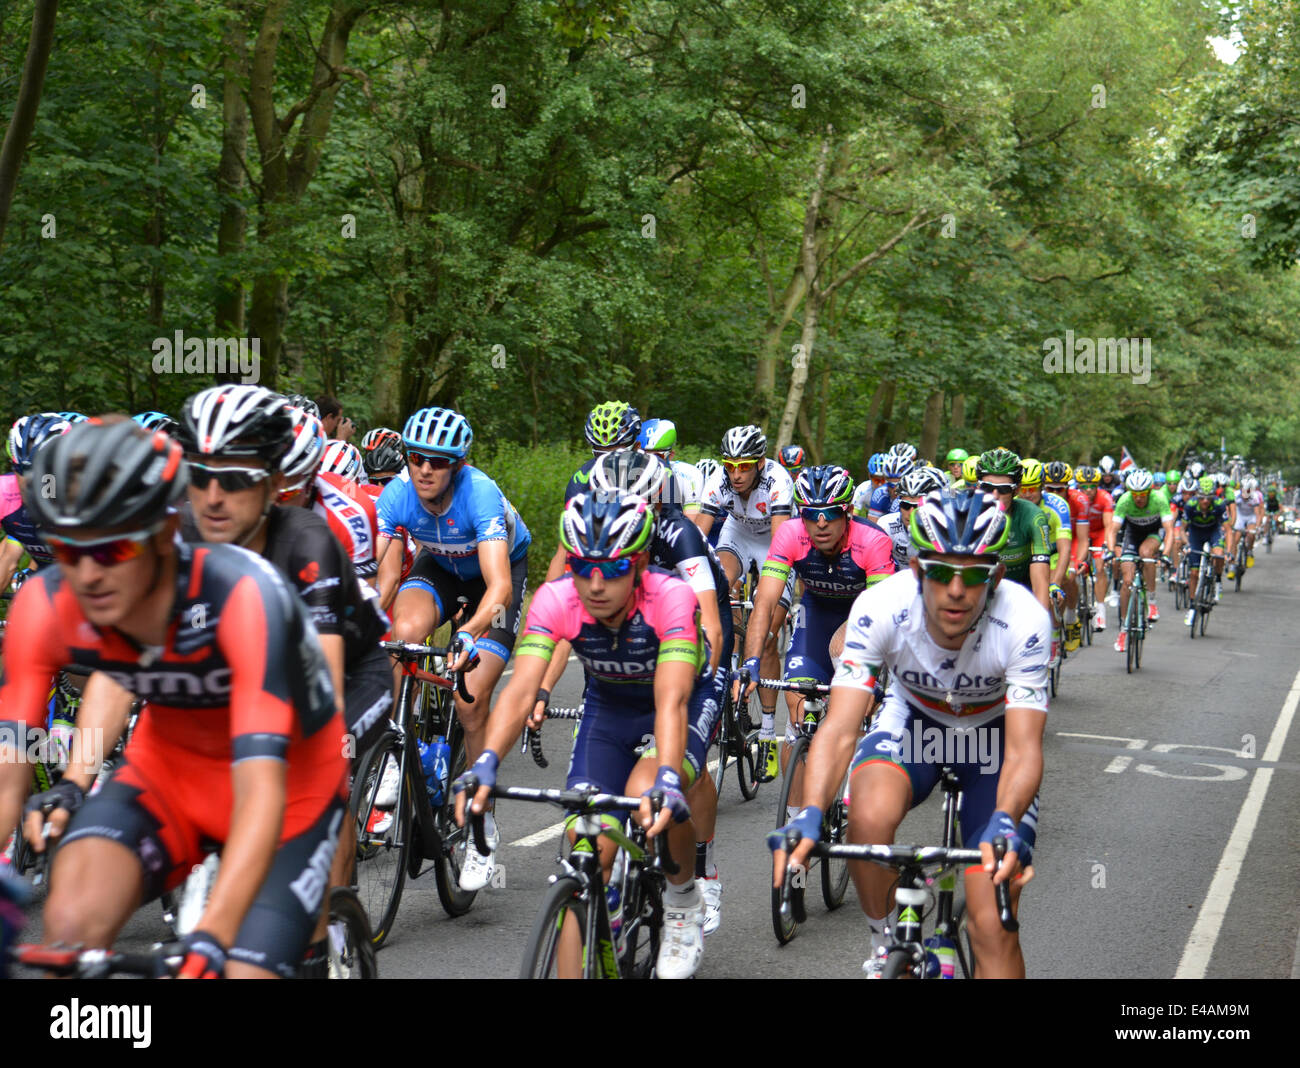 Epping, UK. 07th July, 2014. Tour de France 2014 from Cambridge to London. Participants enter into Epping, Essex on their way to London. 7th July 2014. Credit:  doniphane dupriez/Alamy Live News Stock Photo